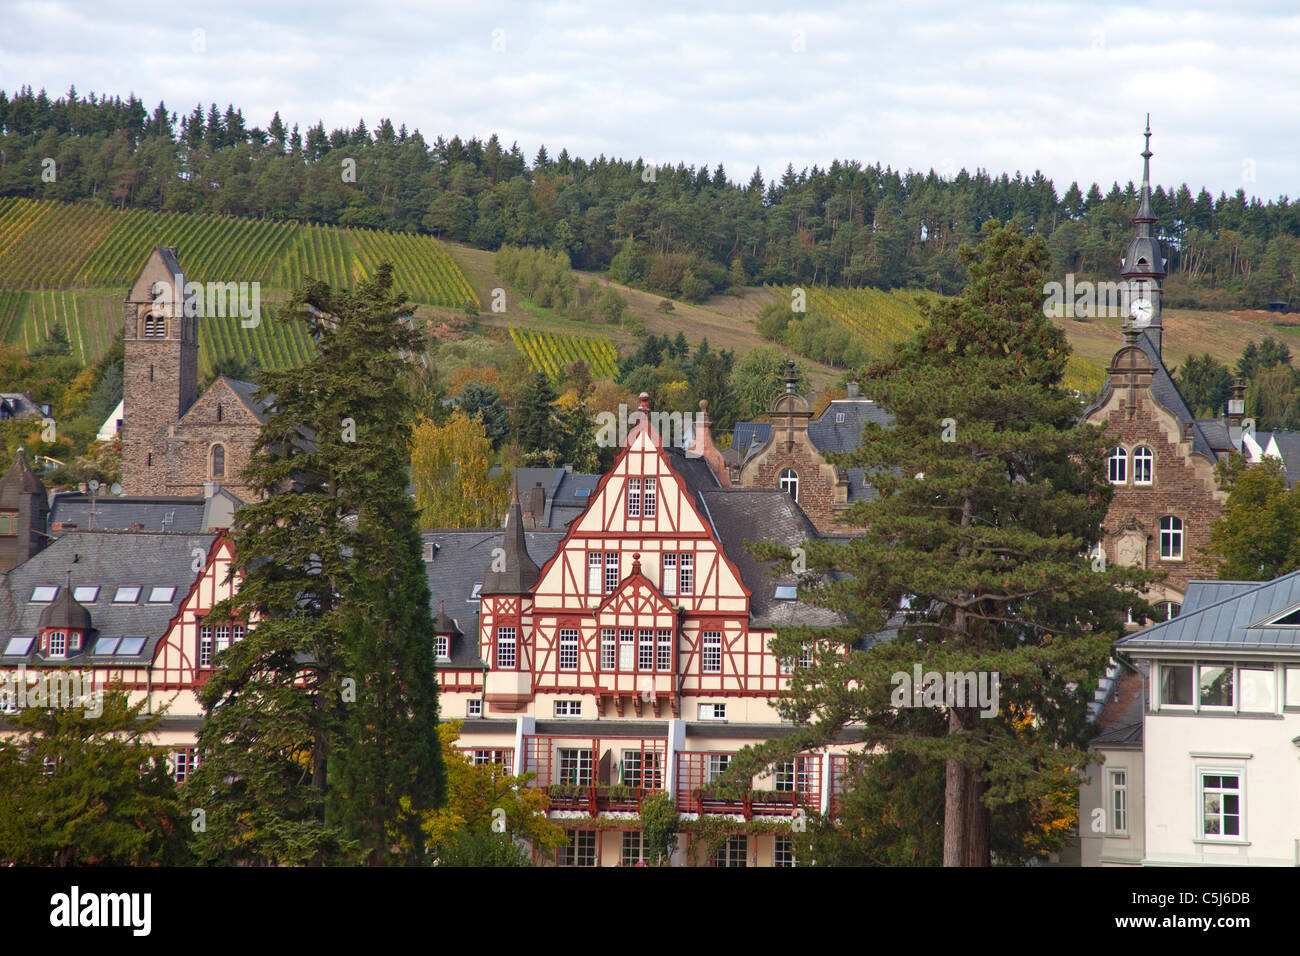 Herbstimmung am Moselufer, Traben-Trarbach, Mosel, Houses at the Riverbank, autumn, Moselle Stock Photo